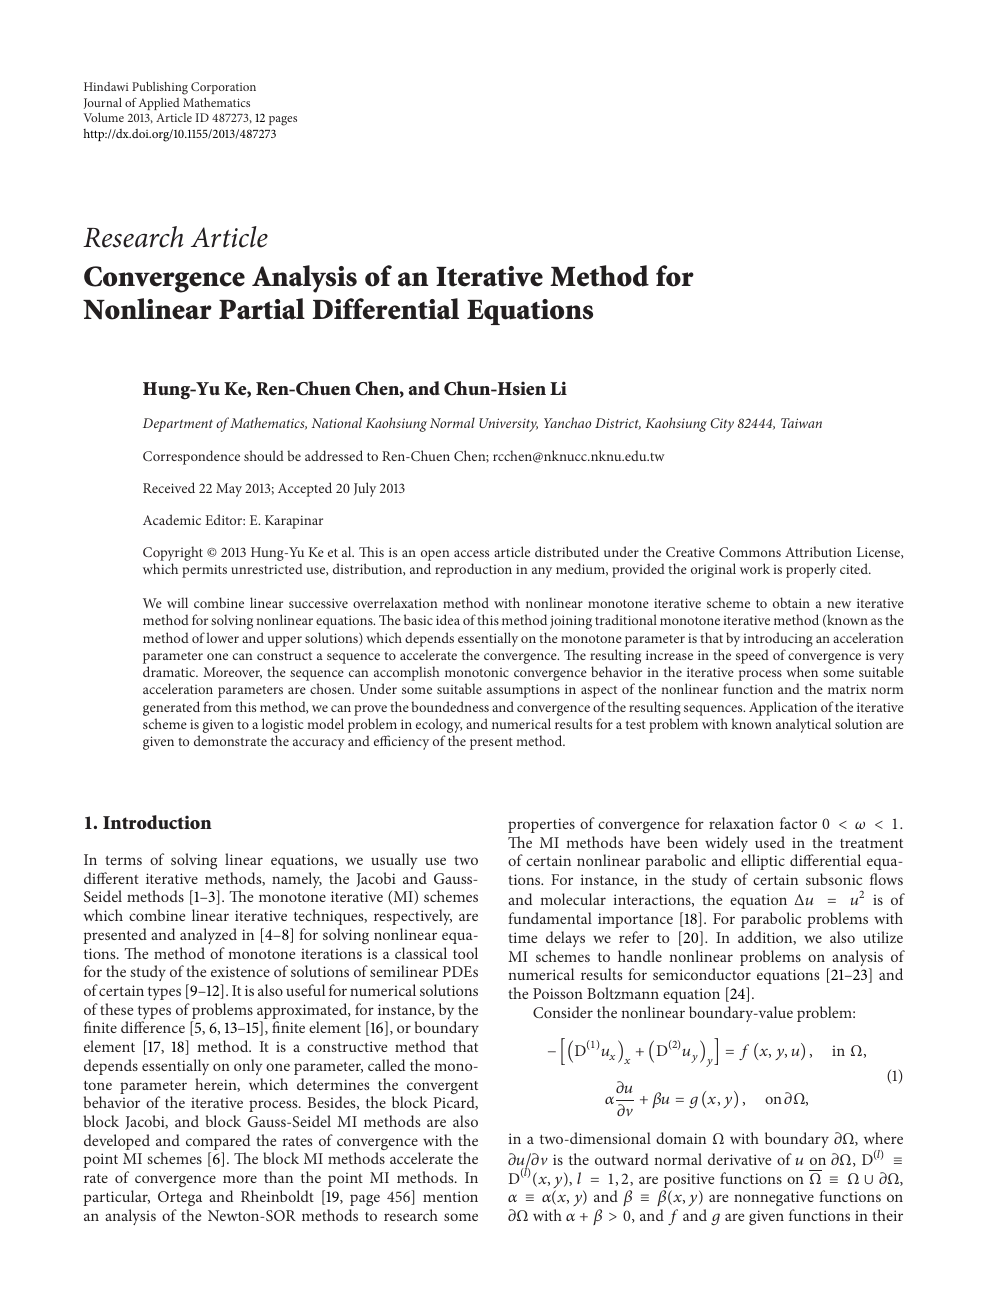 Convergence Analysis Of An Iterative Method For Nonlinear Partial Differential Equations Topic Of Research Paper In Mathematics Download Scholarly Article Pdf And Read For Free On Cyberleninka Open Science Hub